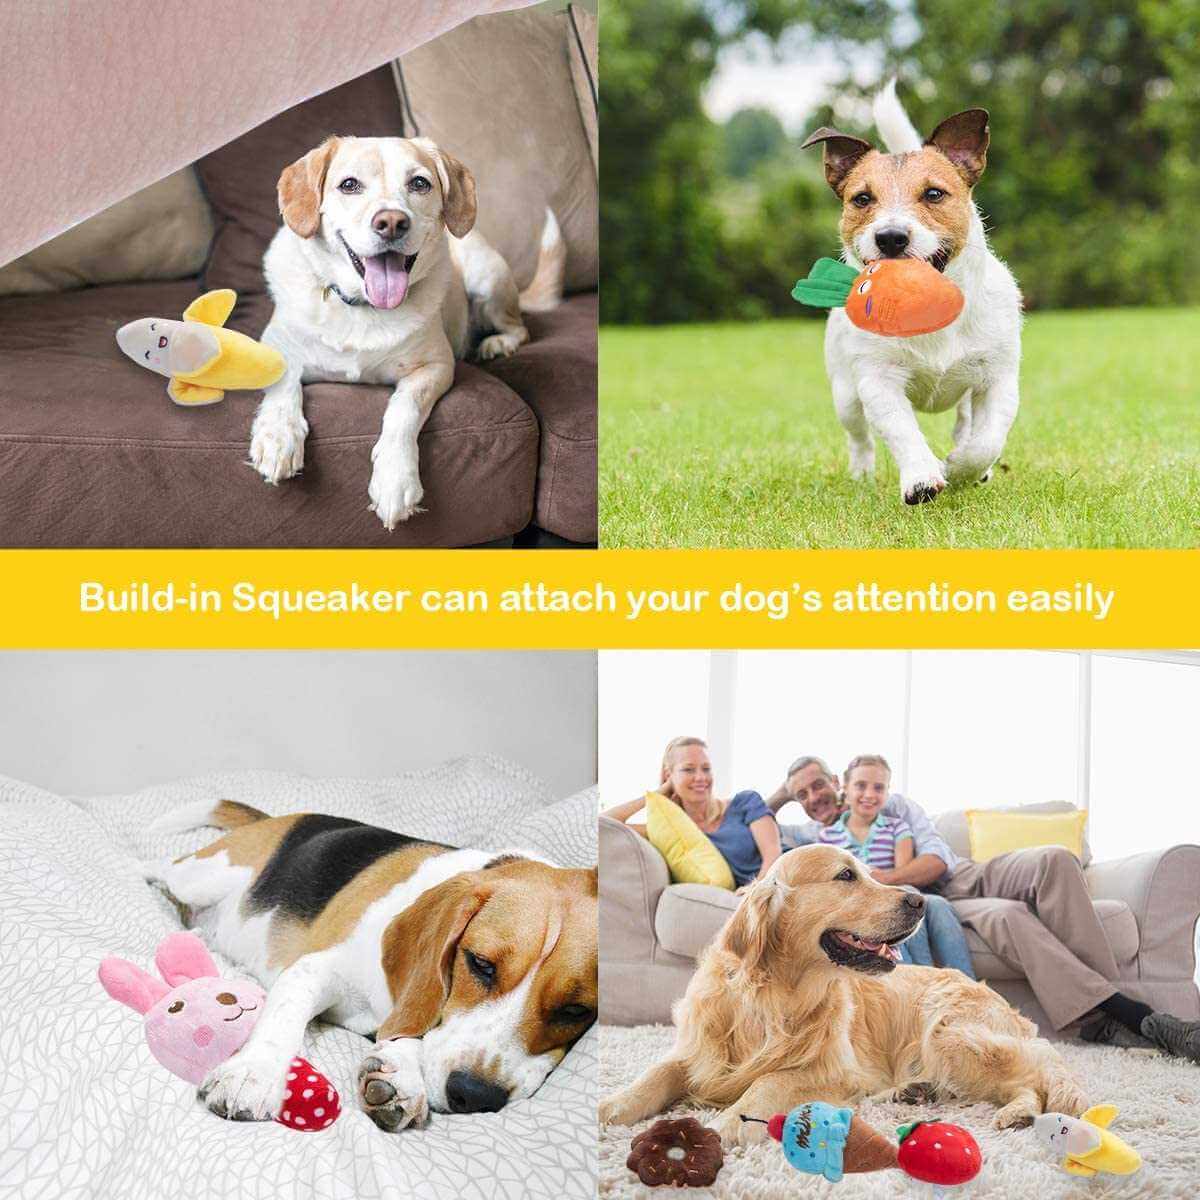 KUTKUT 13 Pcs Squeaky Plush Dog Toys-Pet Pack for Puppy Cute Toys Small Stuffed Puppy Chew Interactive Doggie ToysTooth Grinding & Training Pet Toy for Puppies and Small Dogs. - kutkutstyle